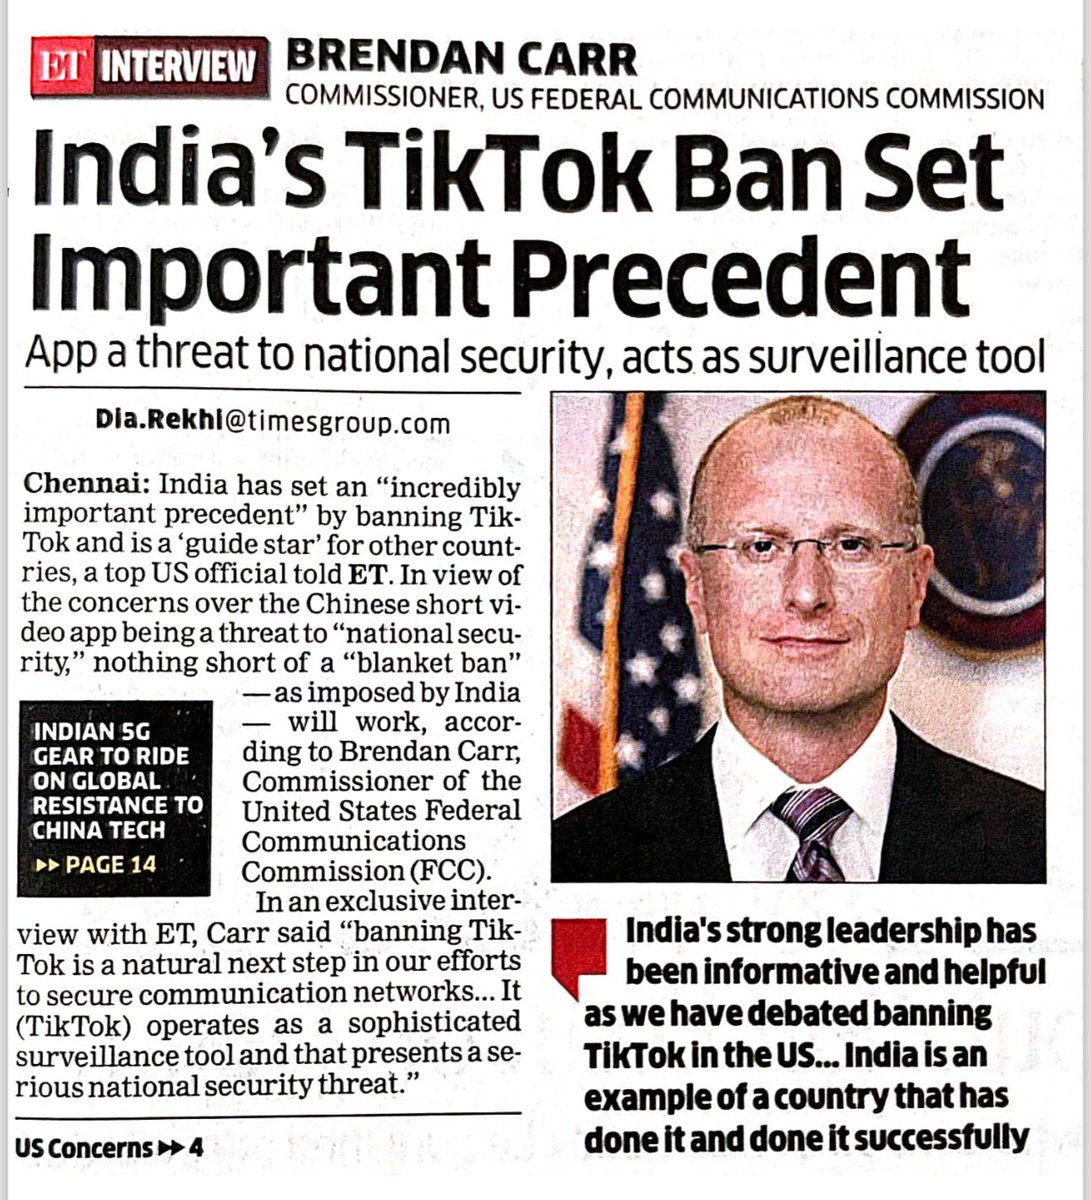 When India banned #TikTok, the Opposition attacked & mocked both @PMOIndia & me personally. Now, the US @FCC is following in our footsteps. India was ahead of its time in developing strategies to contain China’s digital aggression & potential cyberattacks.